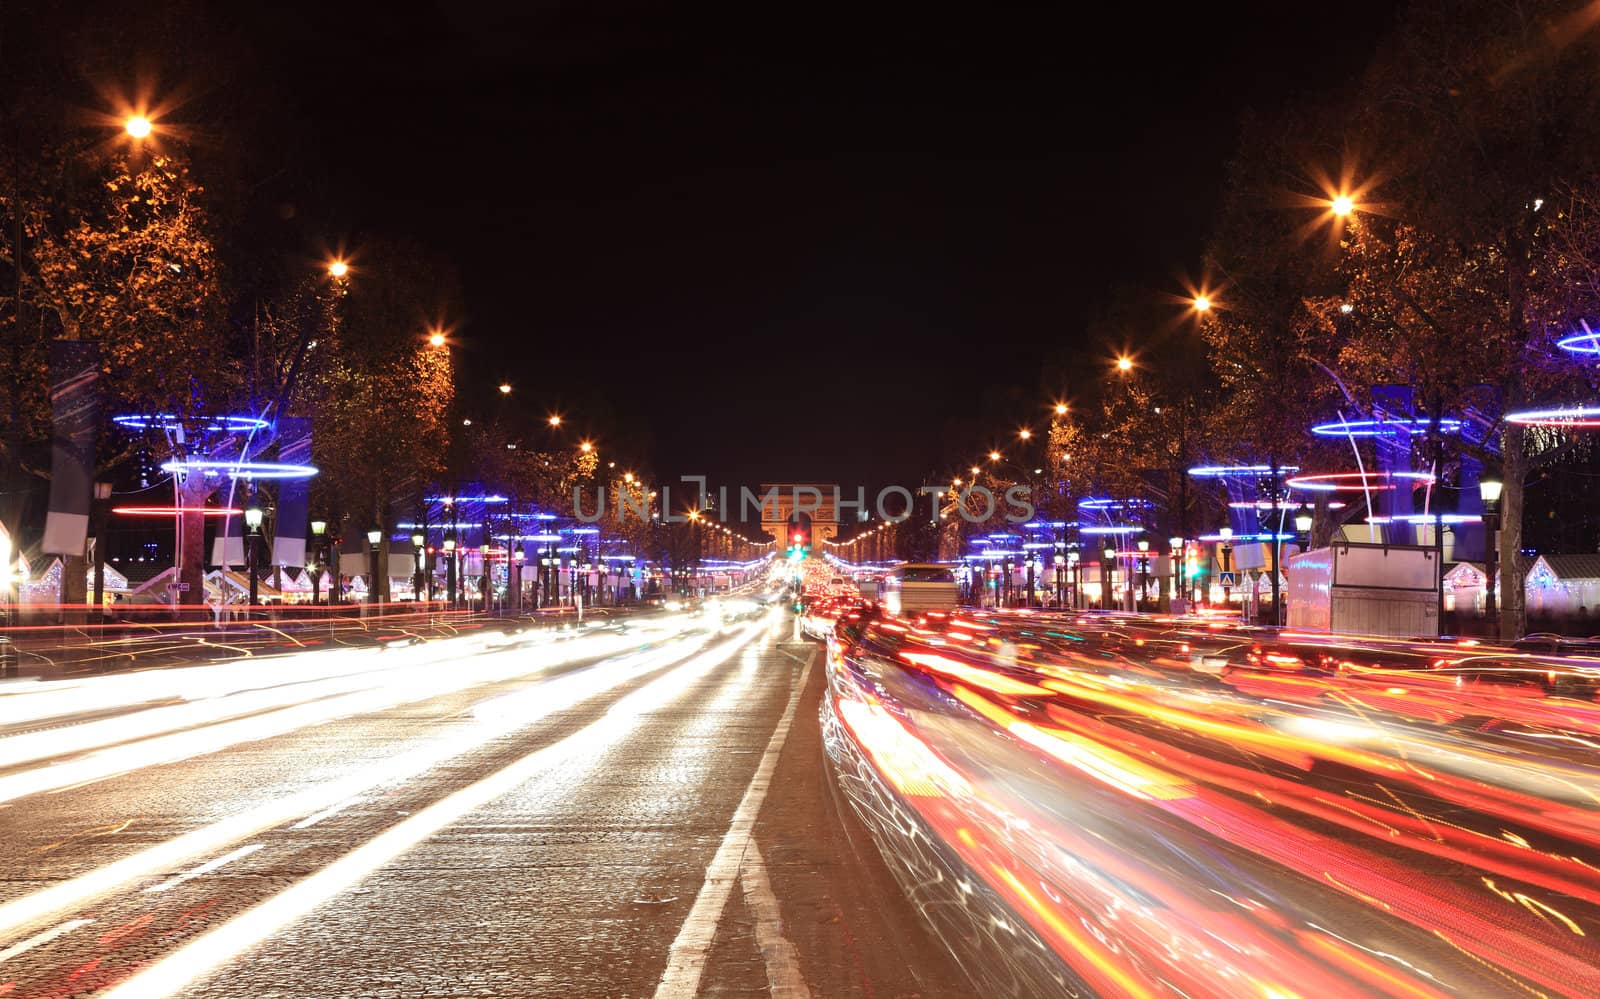 December illumination and traffic lights on the Avenue des Champs-�lys�es in Paris,Europe.